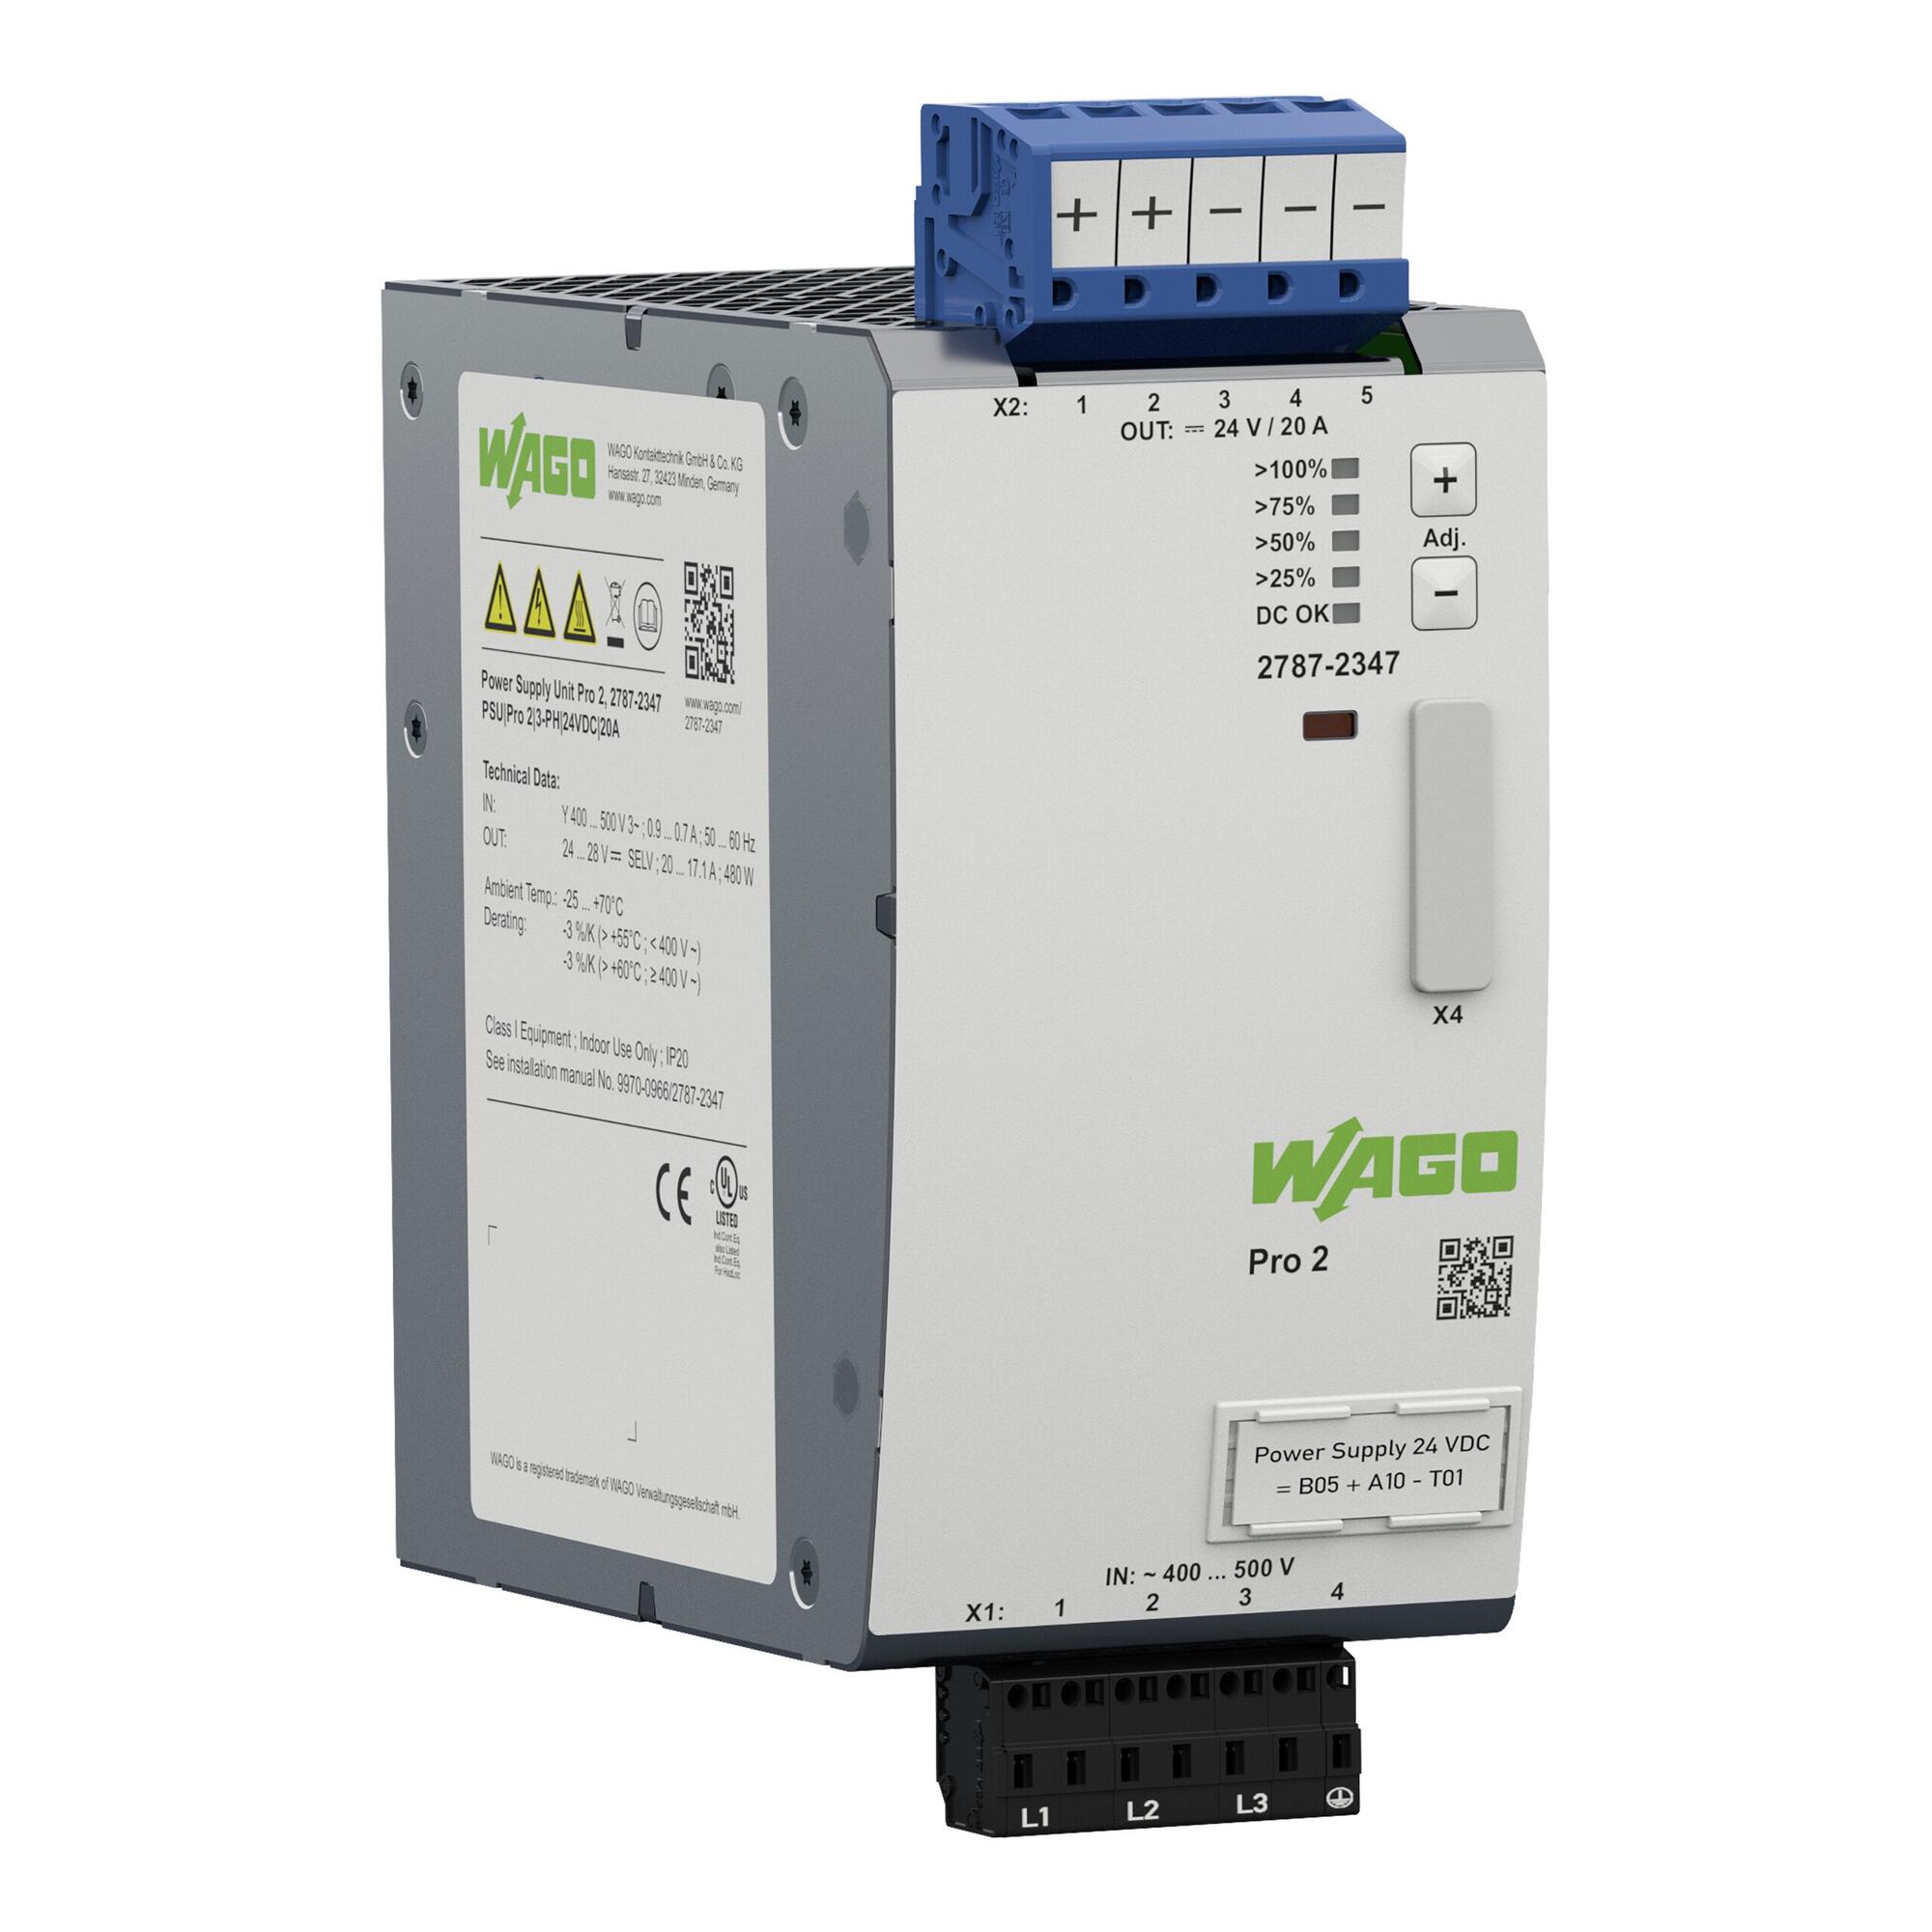 Power supply; Pro 2; 3-phase; 24 VDC output voltage; 20 A output current; TopBoost + PowerBoost; communication capability